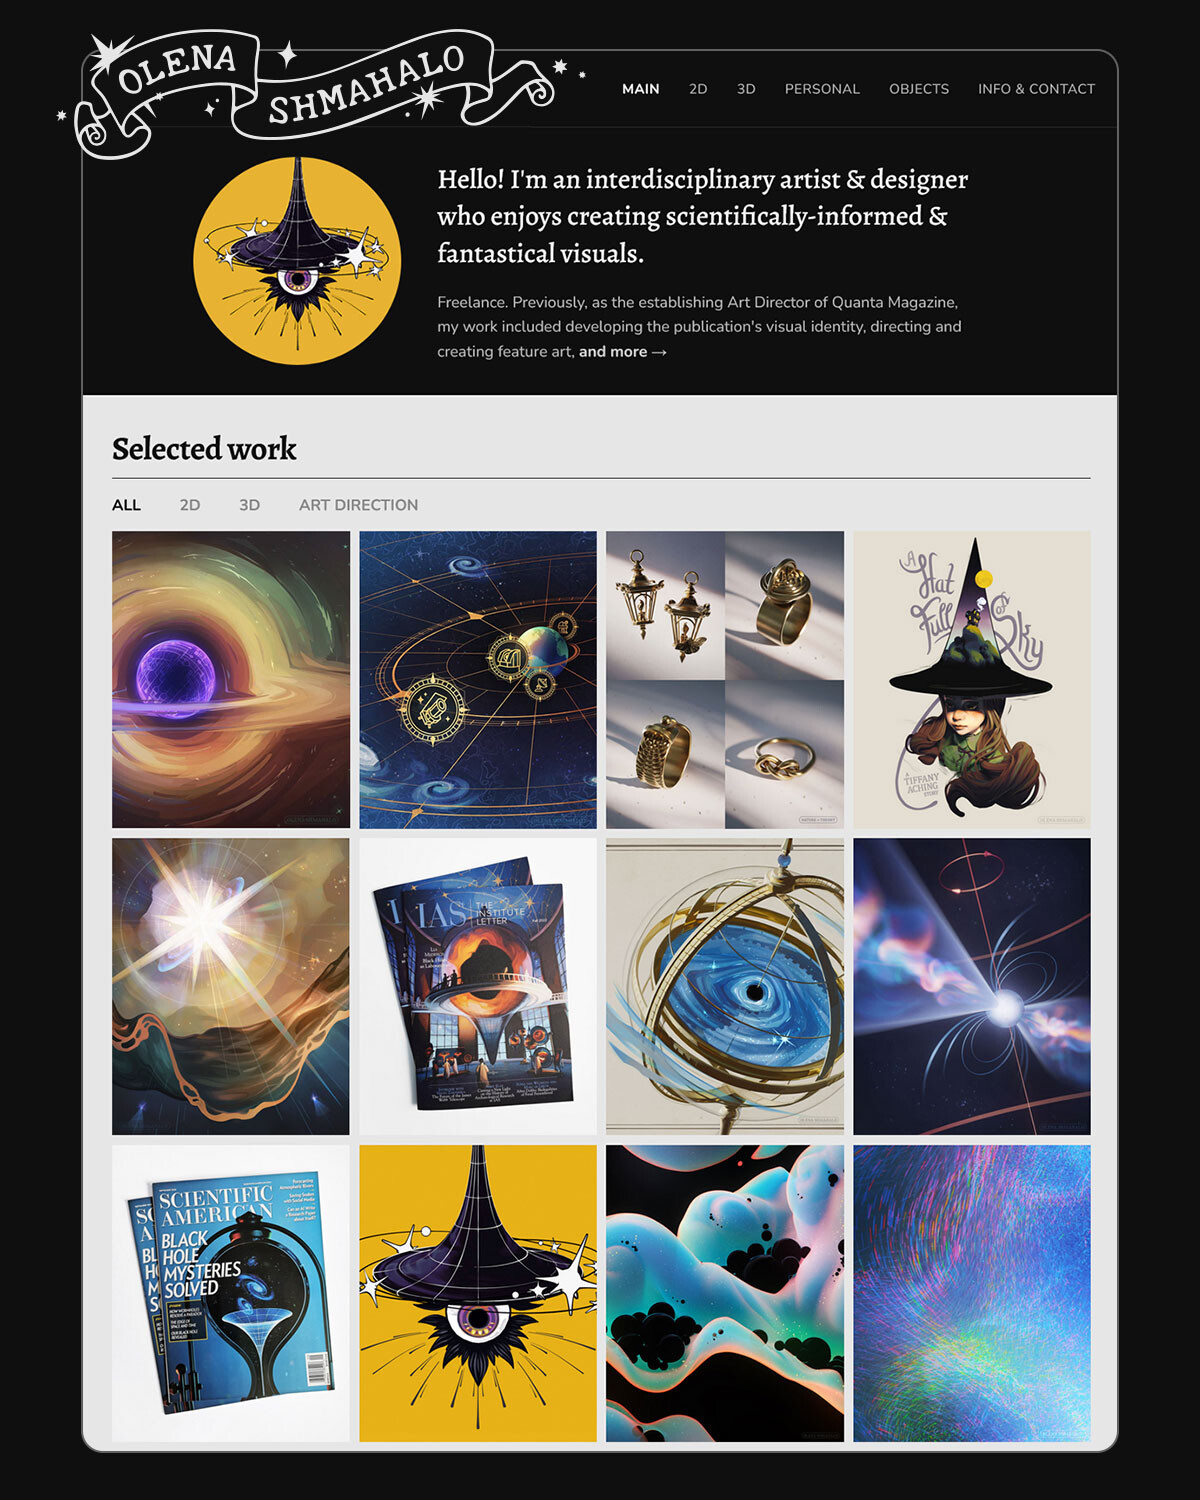 My latest work is exclusively on:
https://www.olenashmahalo.com/

Epic/ArtStation prioritized "AI" over artists. I no longer update here.

Find me elsewhere:
https://linktr.ee/NatureInTheory

—
https://tinyurl.com/SciAm-AI-Causes-Harm
—